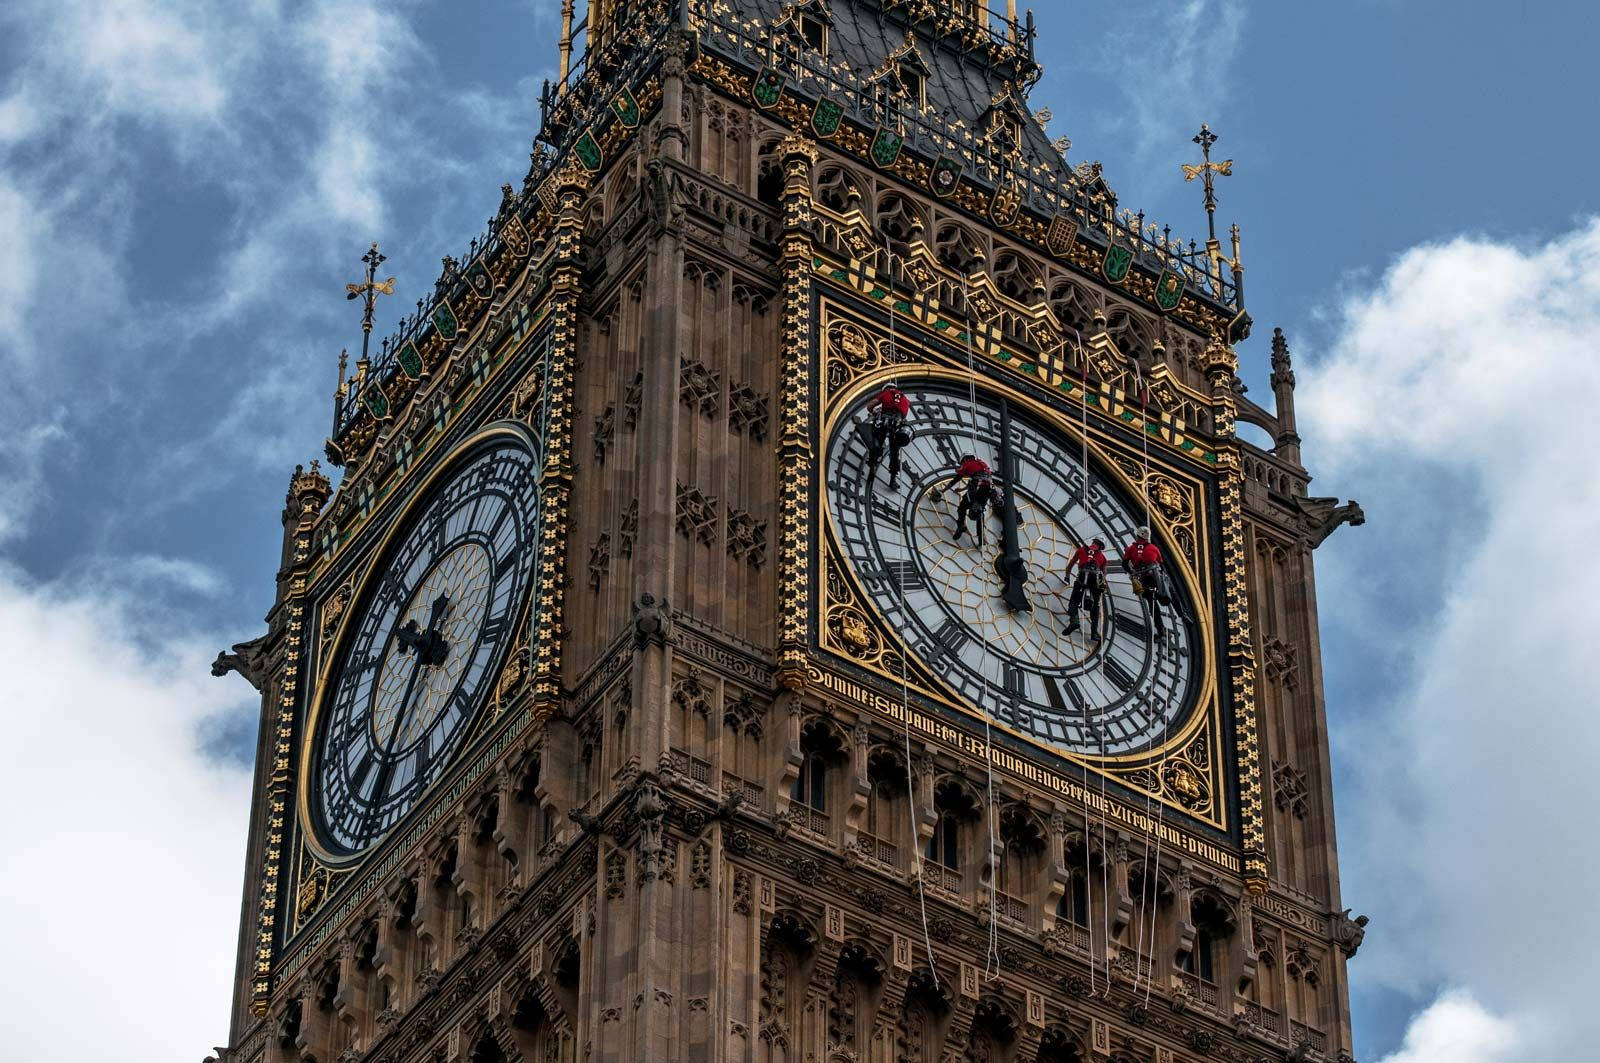 Cleaning The Big Ben